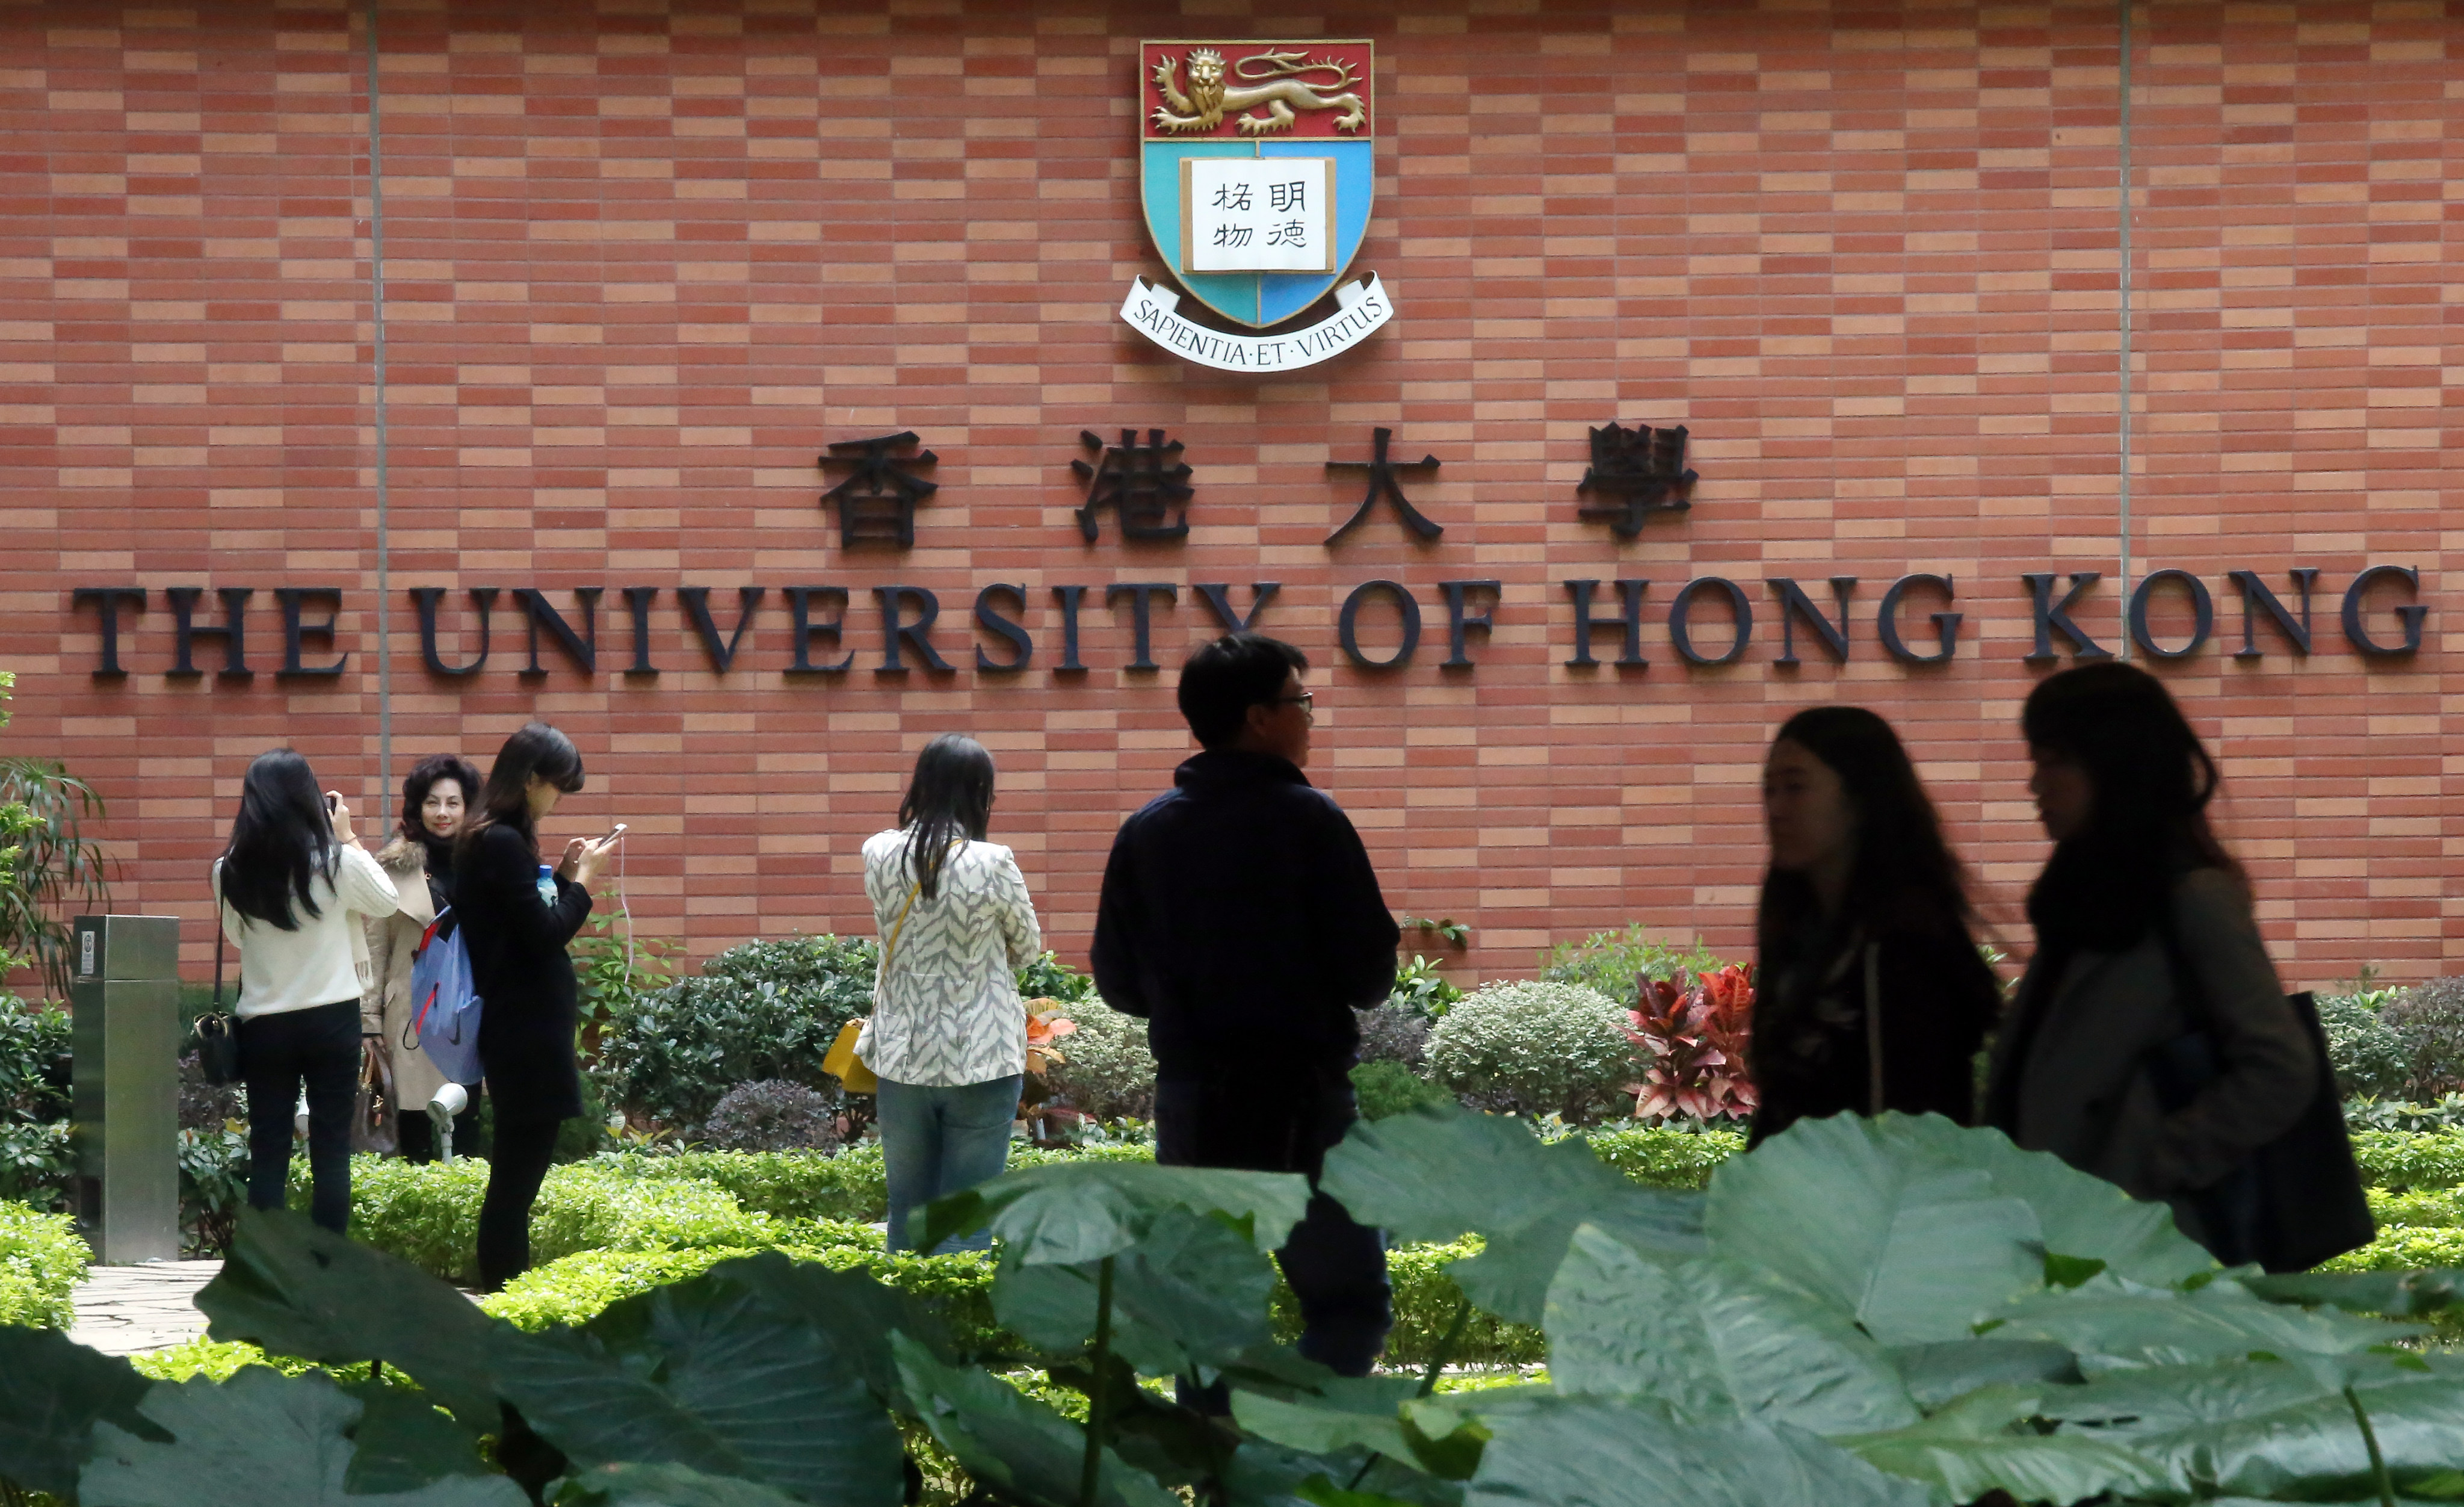 The University of Hong Kong’s reputation will be harmed by the row at the top, its chief says. Photo: K. Y. Cheng